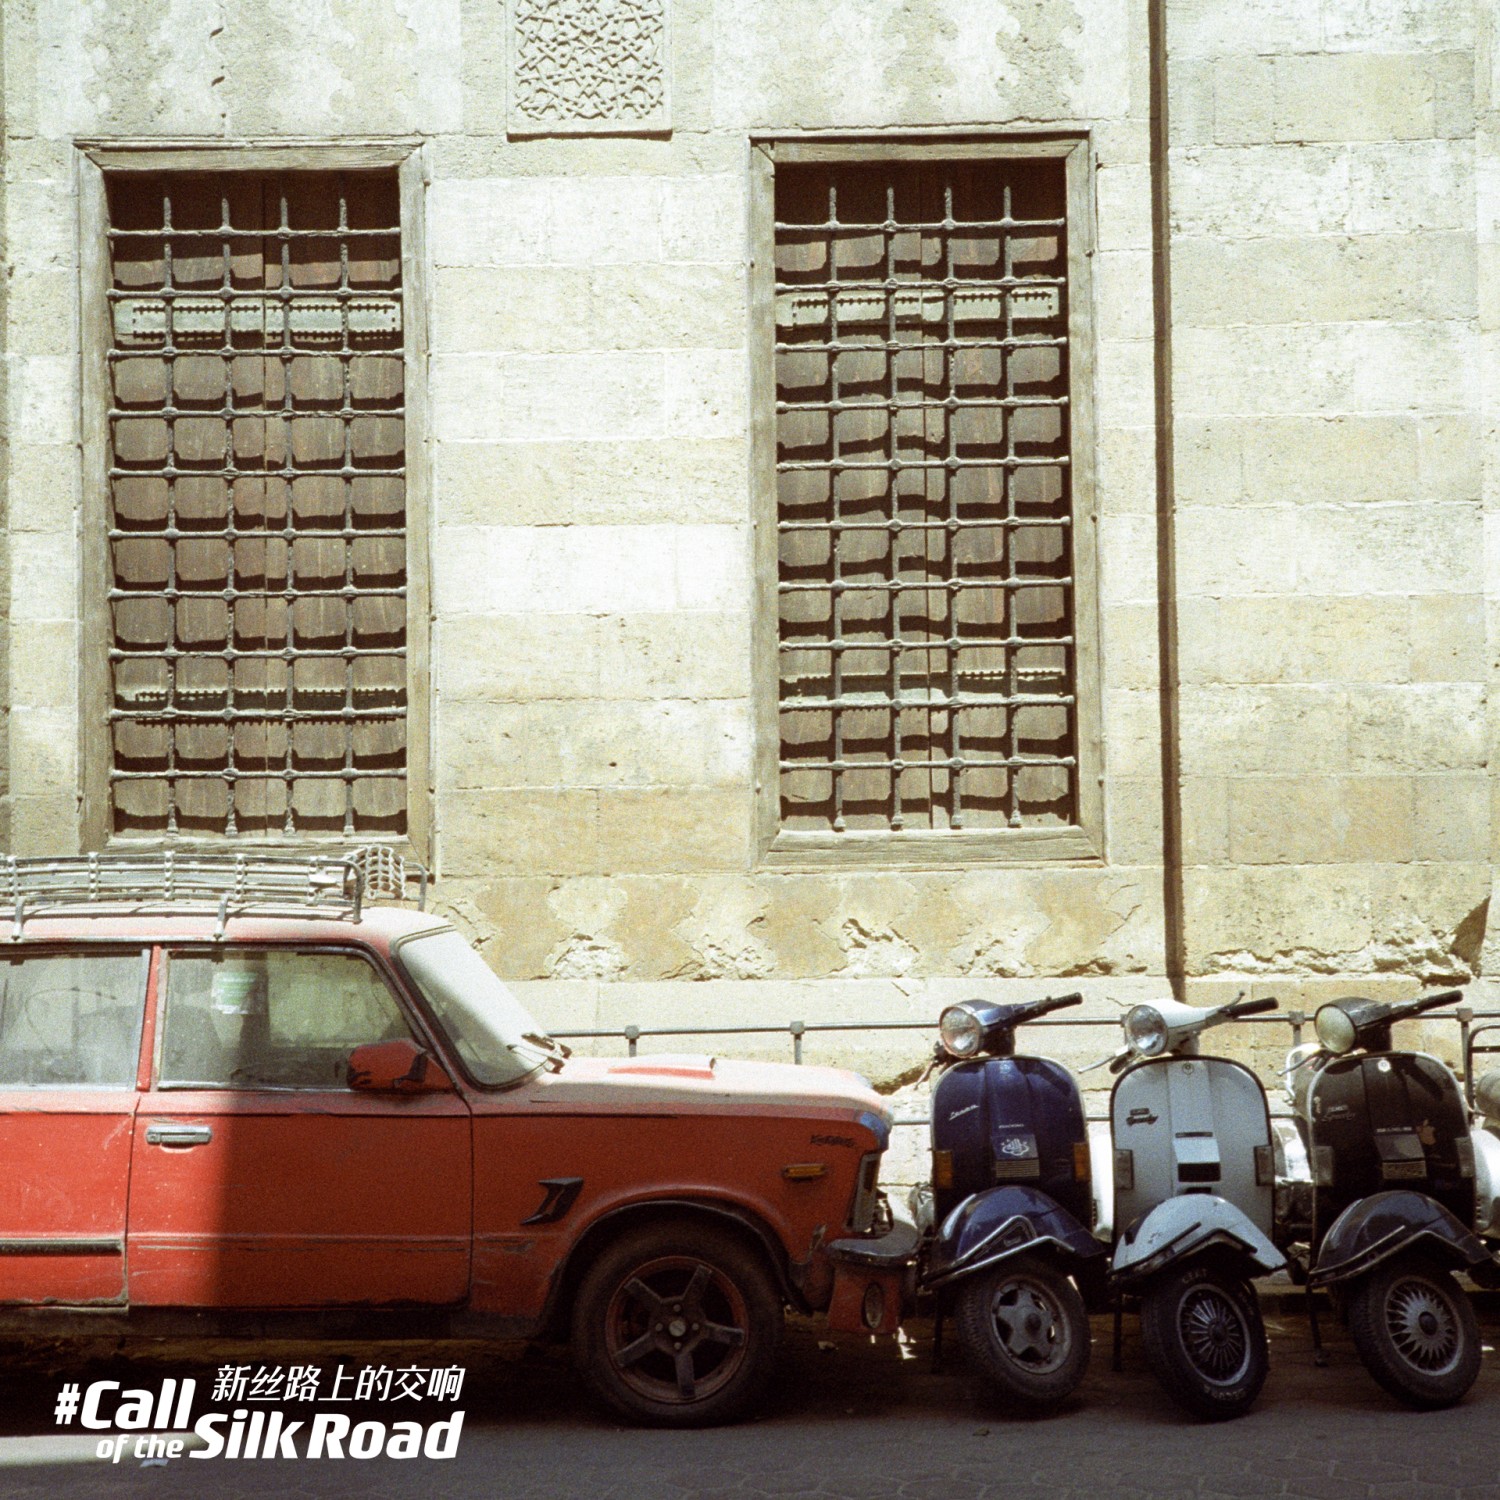 Parked cars and motorcycles in Old Cairo /Mohamed Sherif